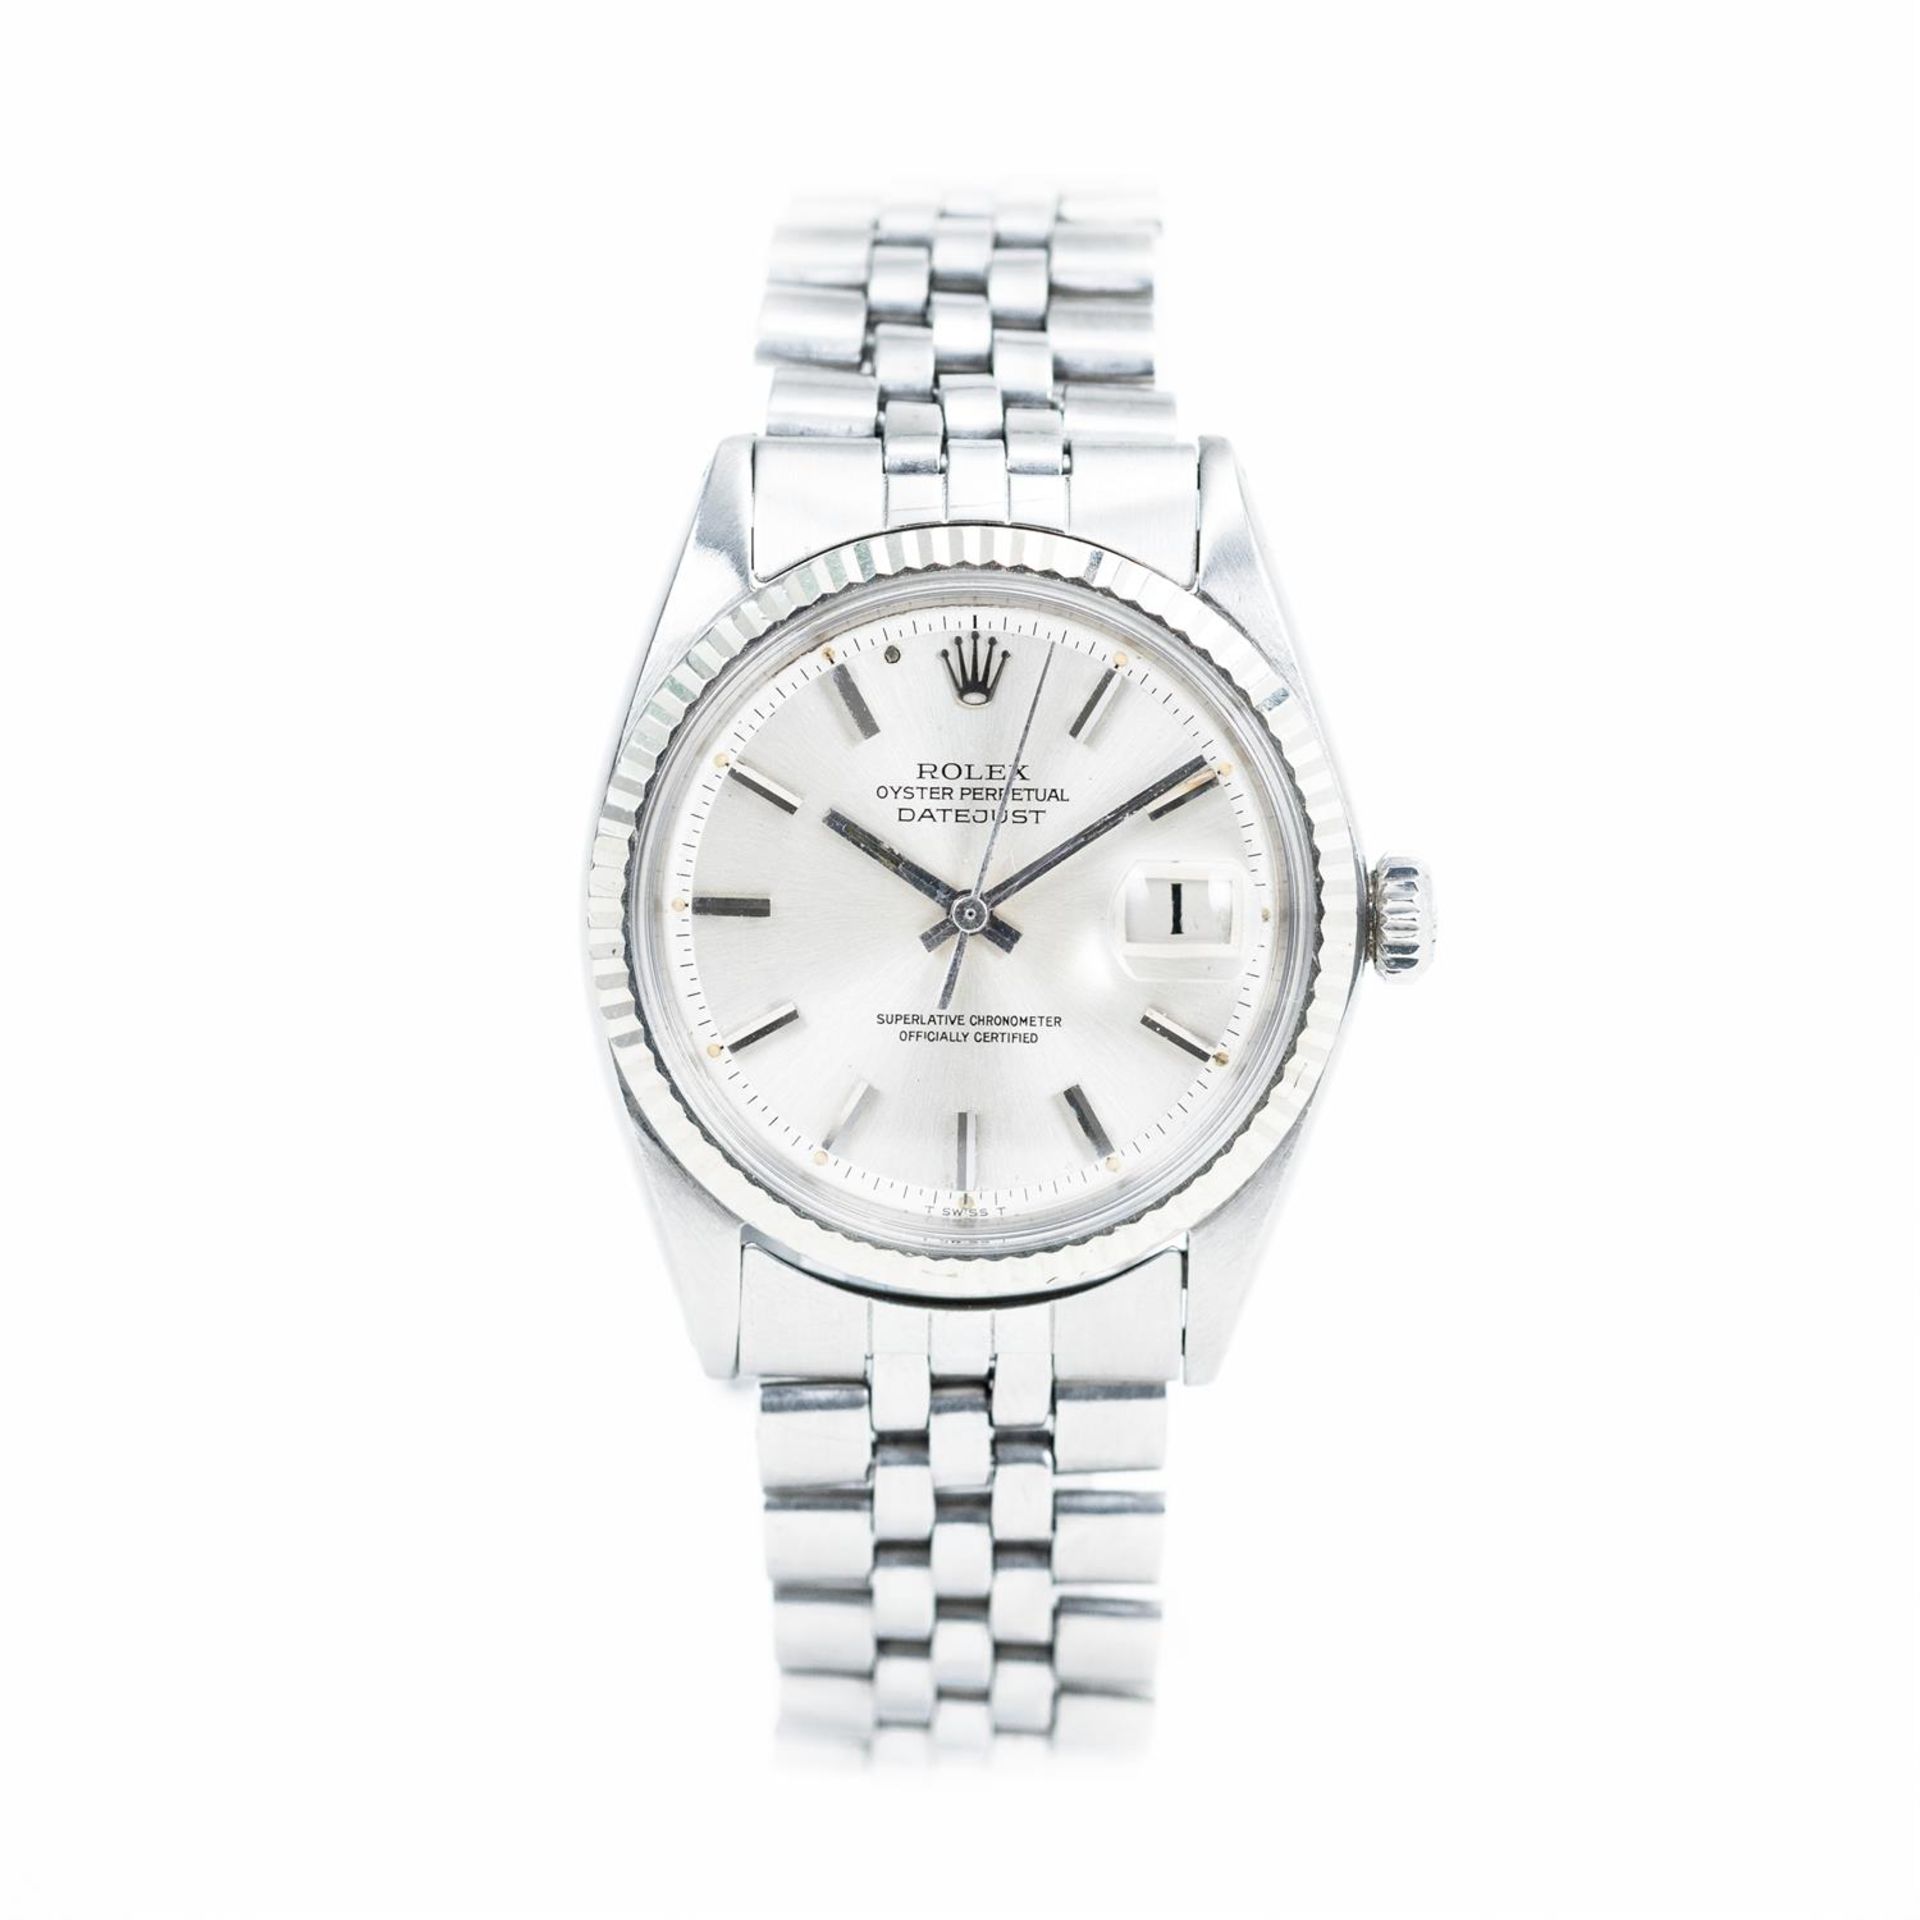 1967 Rolex Datejust Stainless Steel - Image 2 of 4